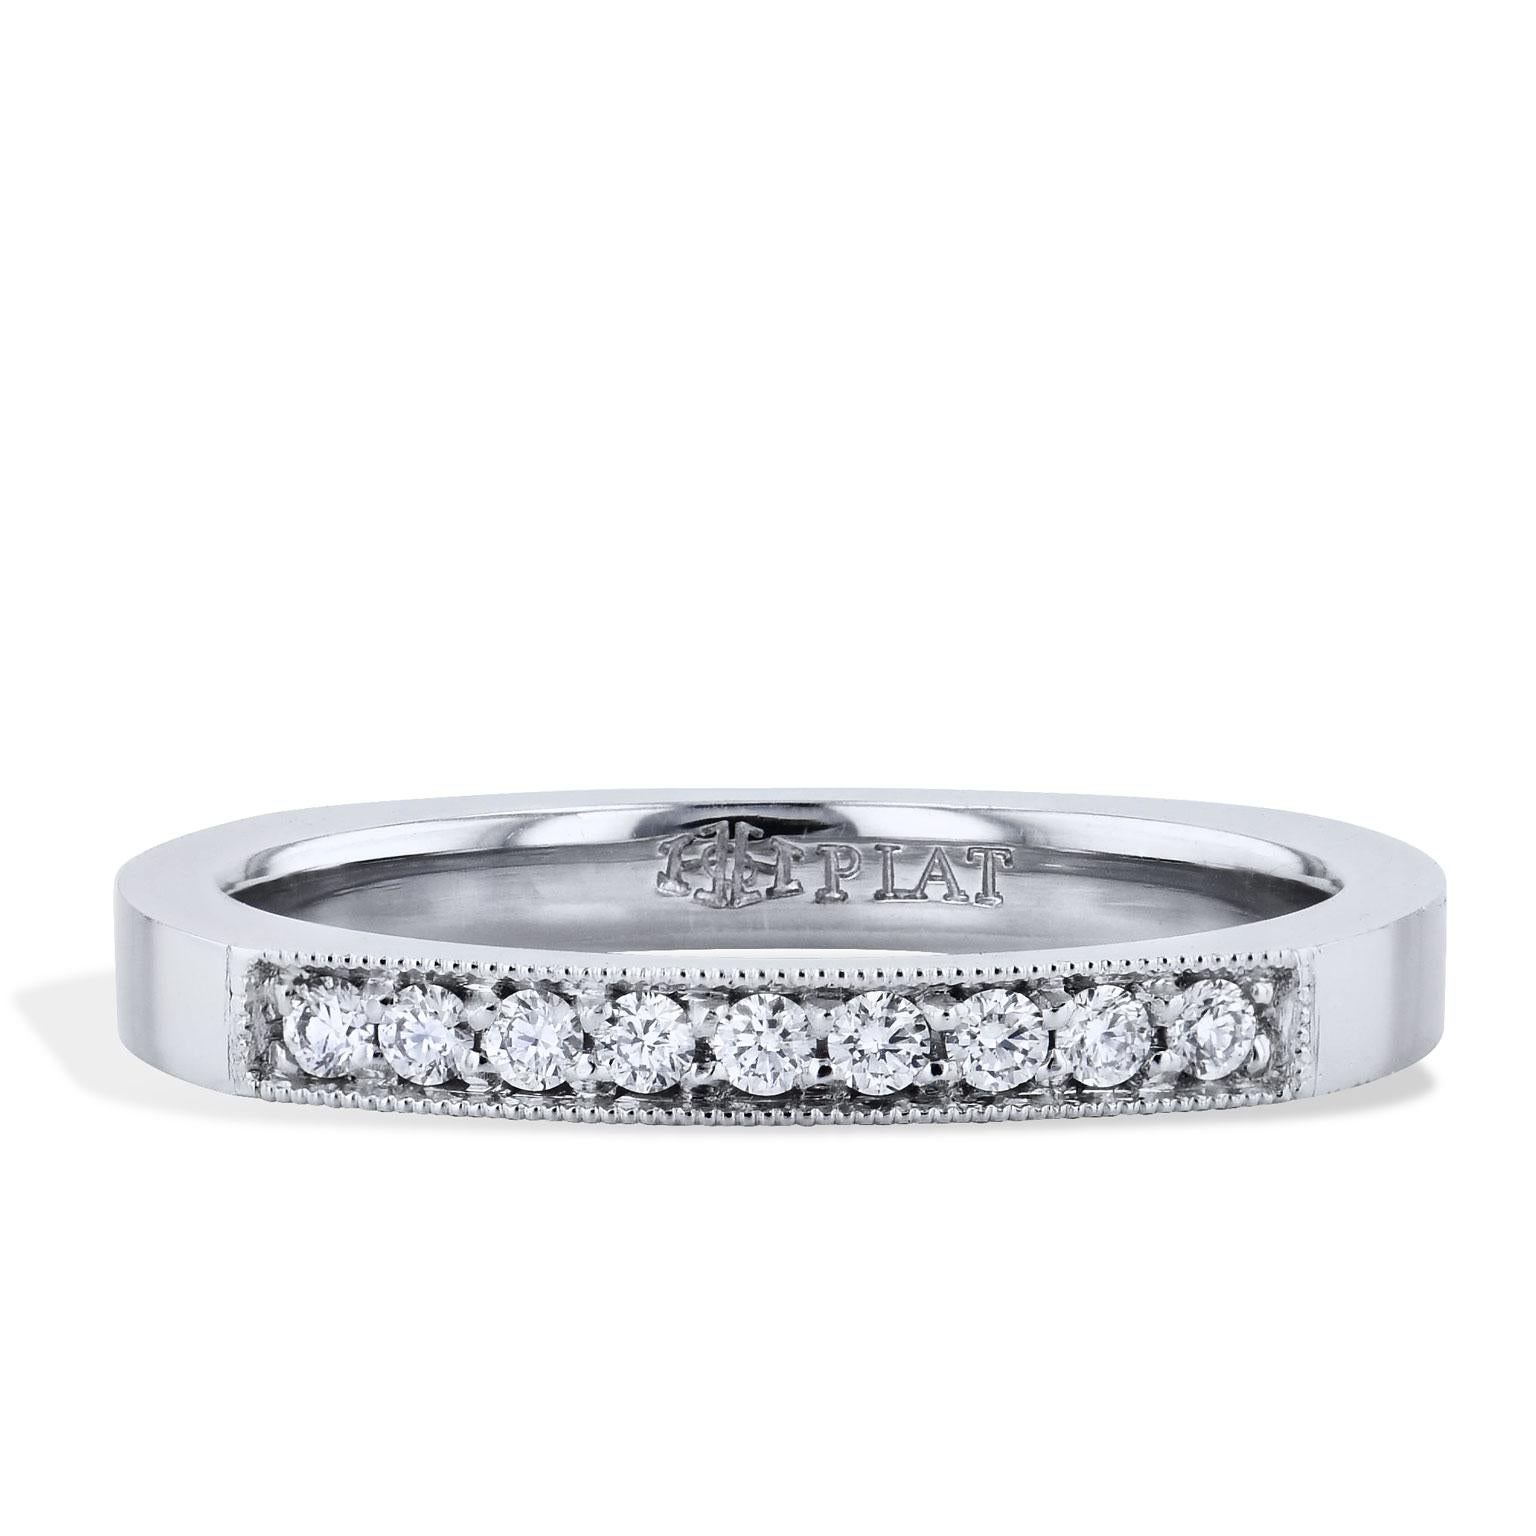 H&H 0.10 Carat Diamond Band Ring in Platinum In New Condition For Sale In Miami, FL